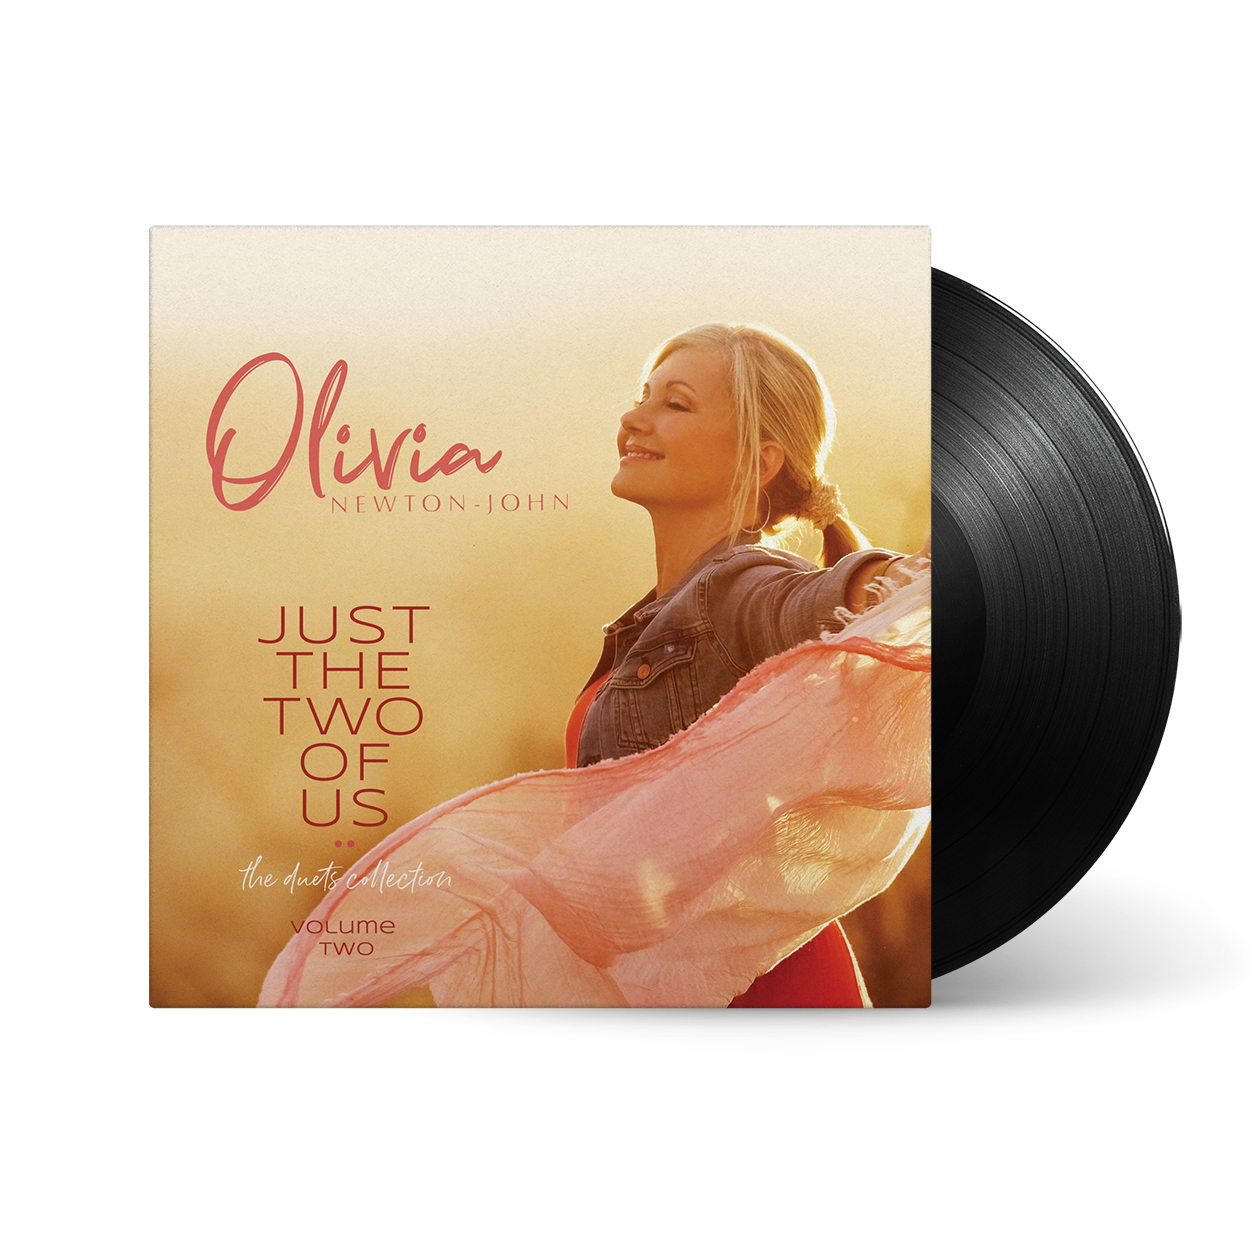 Olivia Newton-John - Just The Two Of Us - The Duets Collection Volume 2: Vinyl LP